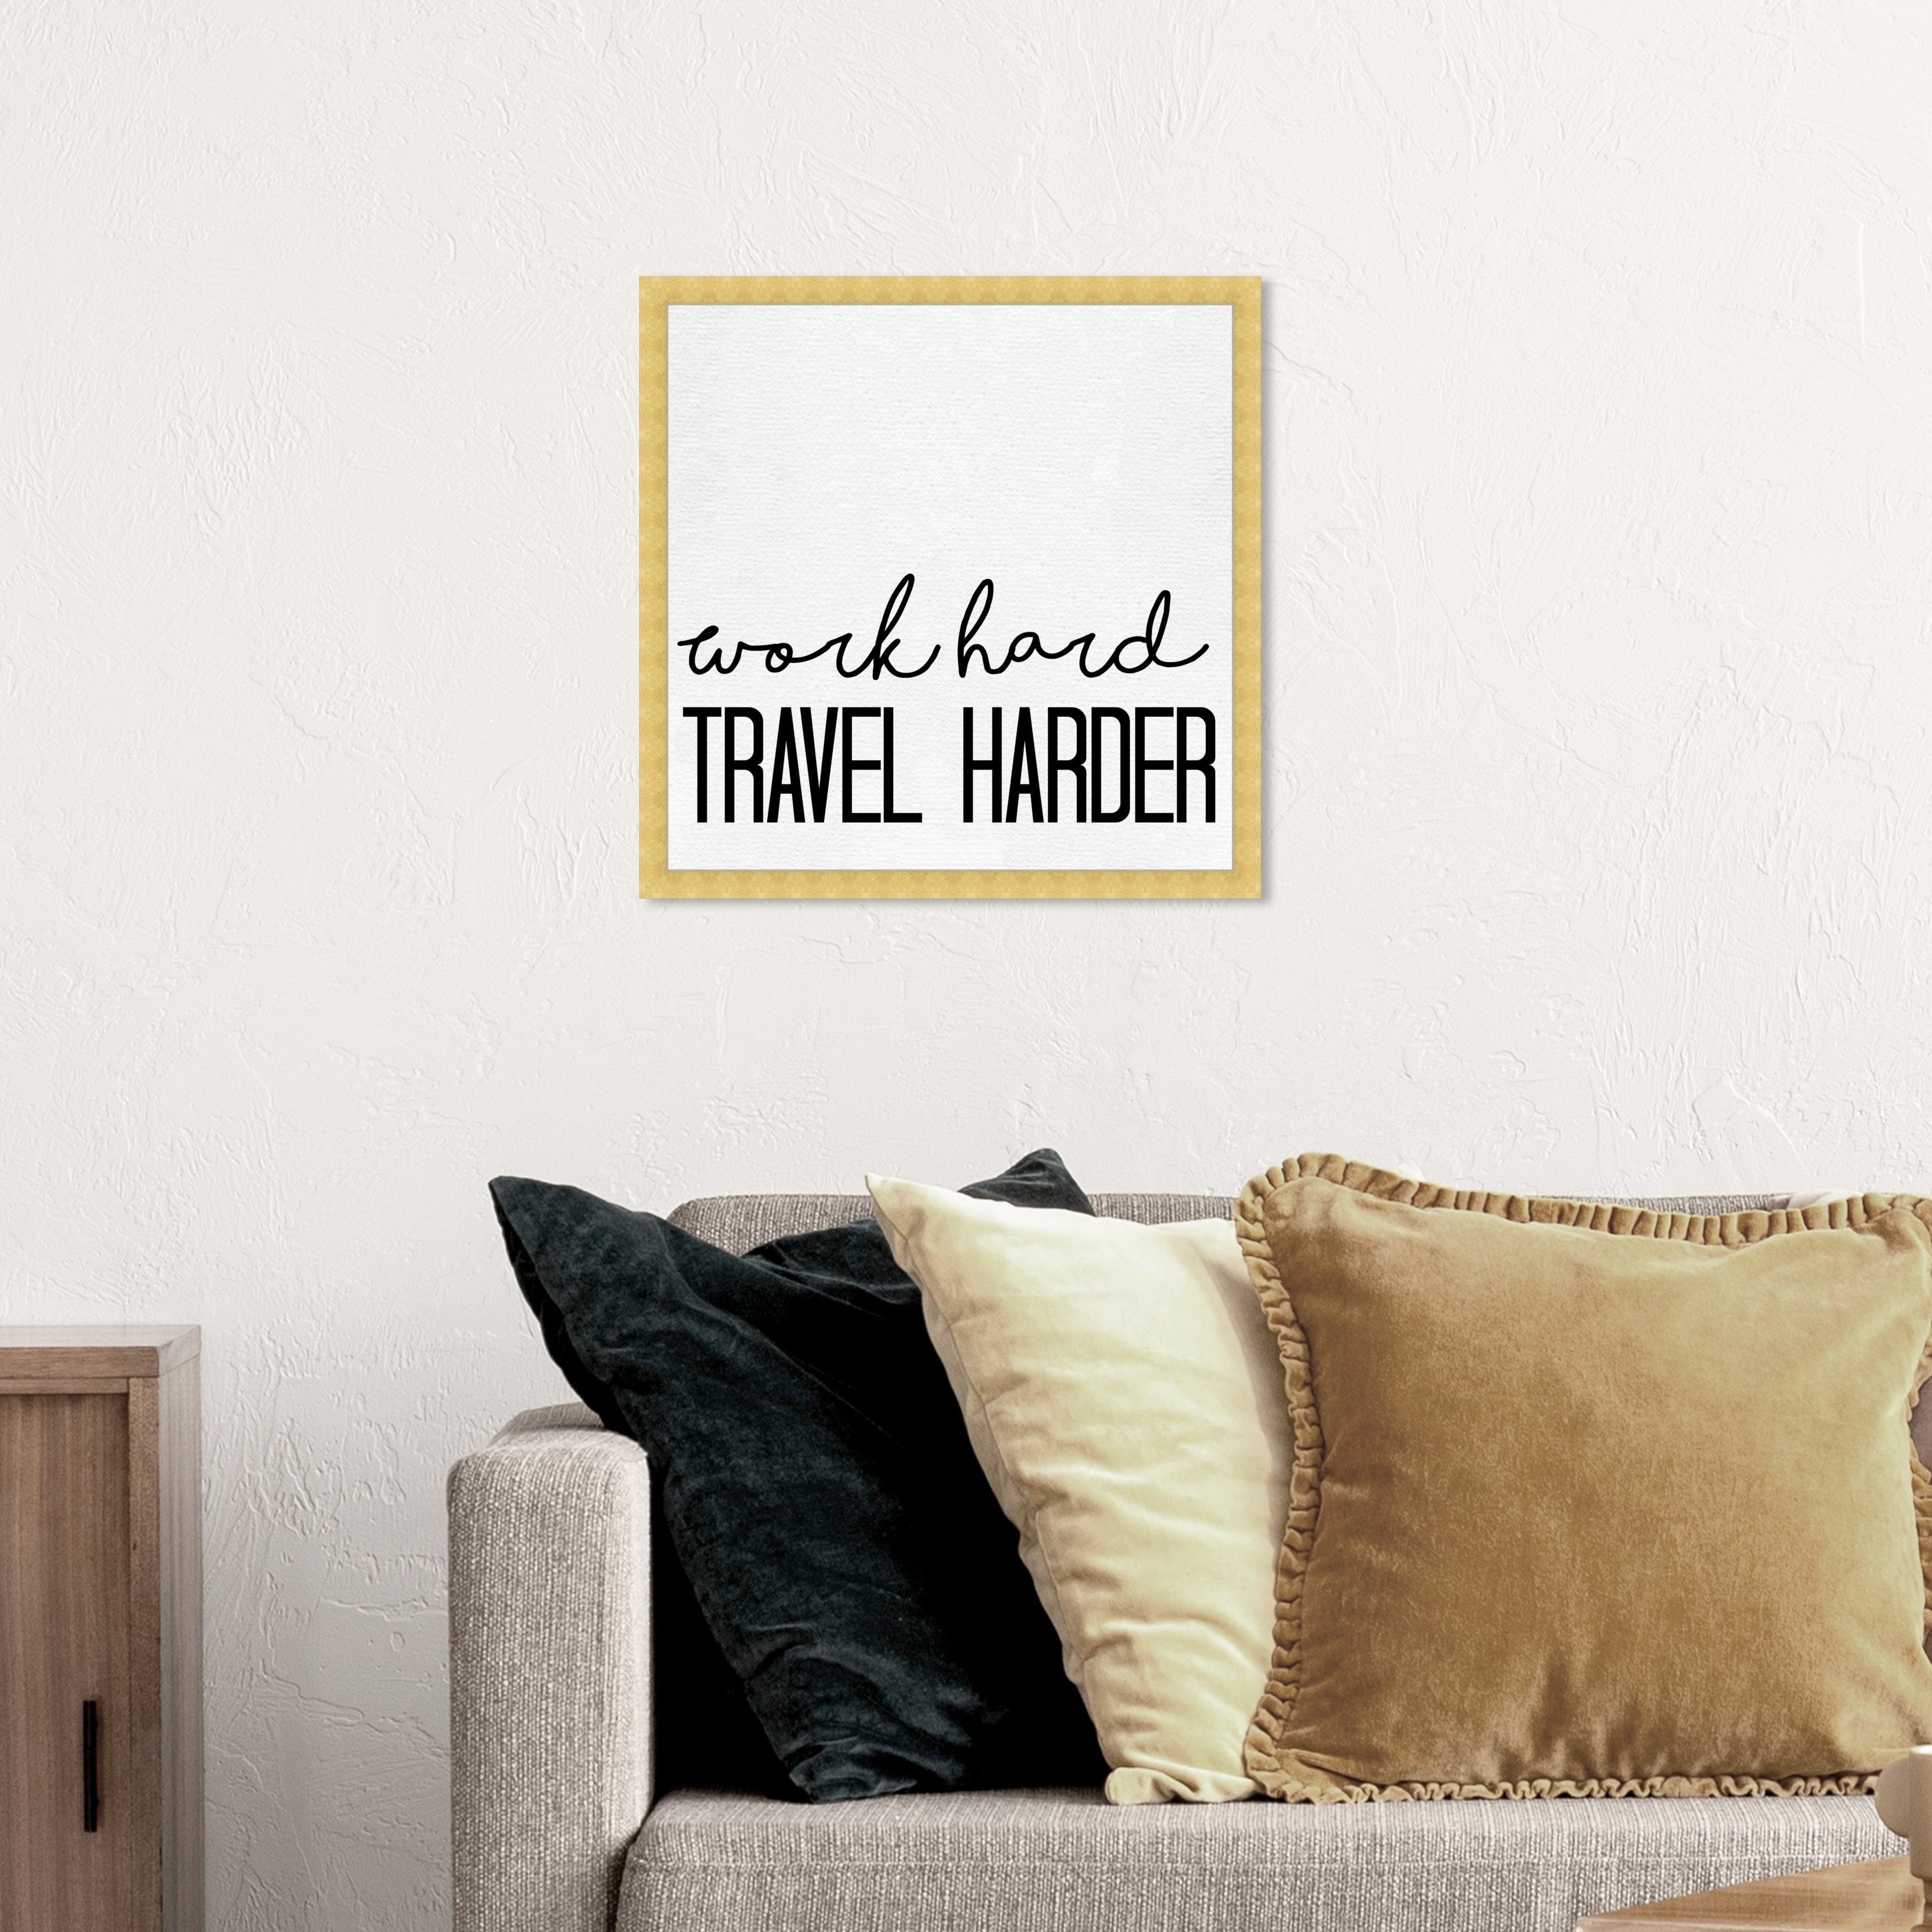 work hard travel harder print picture WALL ART TRAVEL UNFRAMED TYPOGRAPHY A4 99 